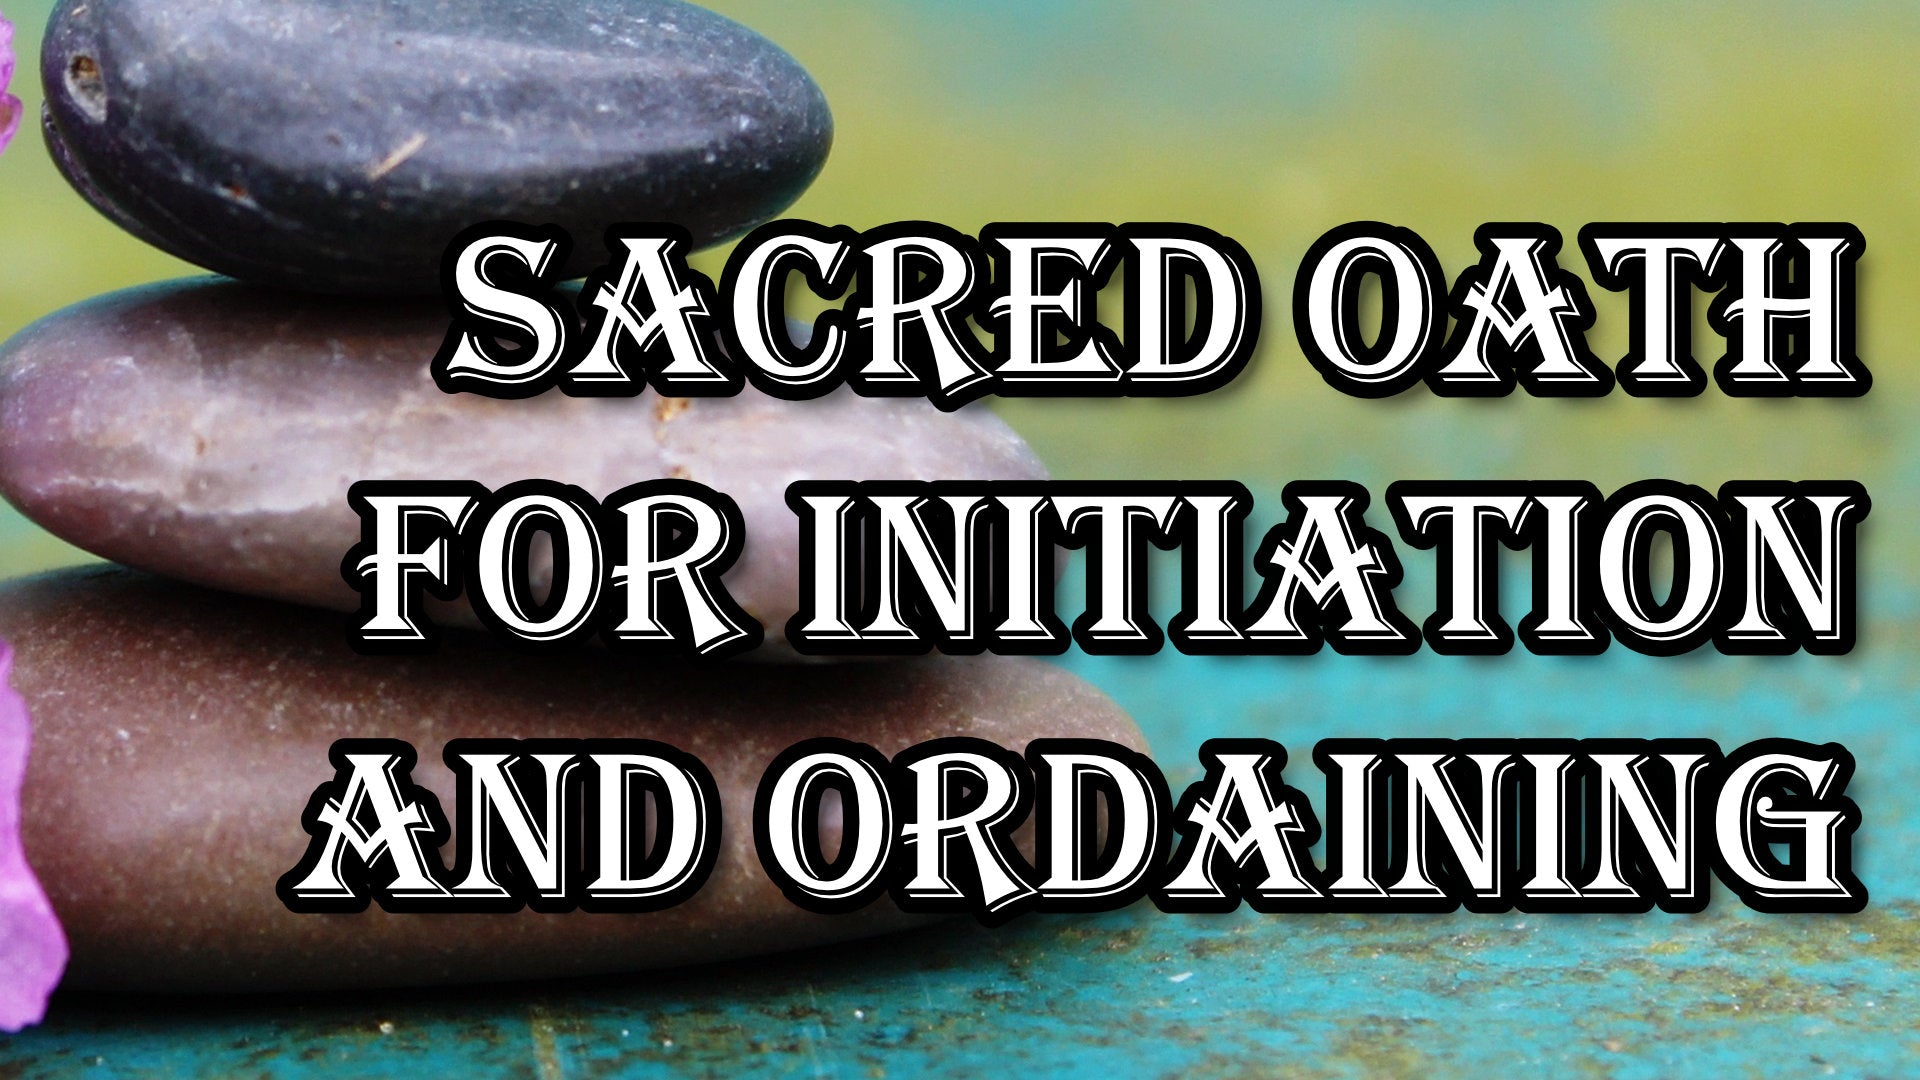 
          The Oath for Initiation and Ordaining
        